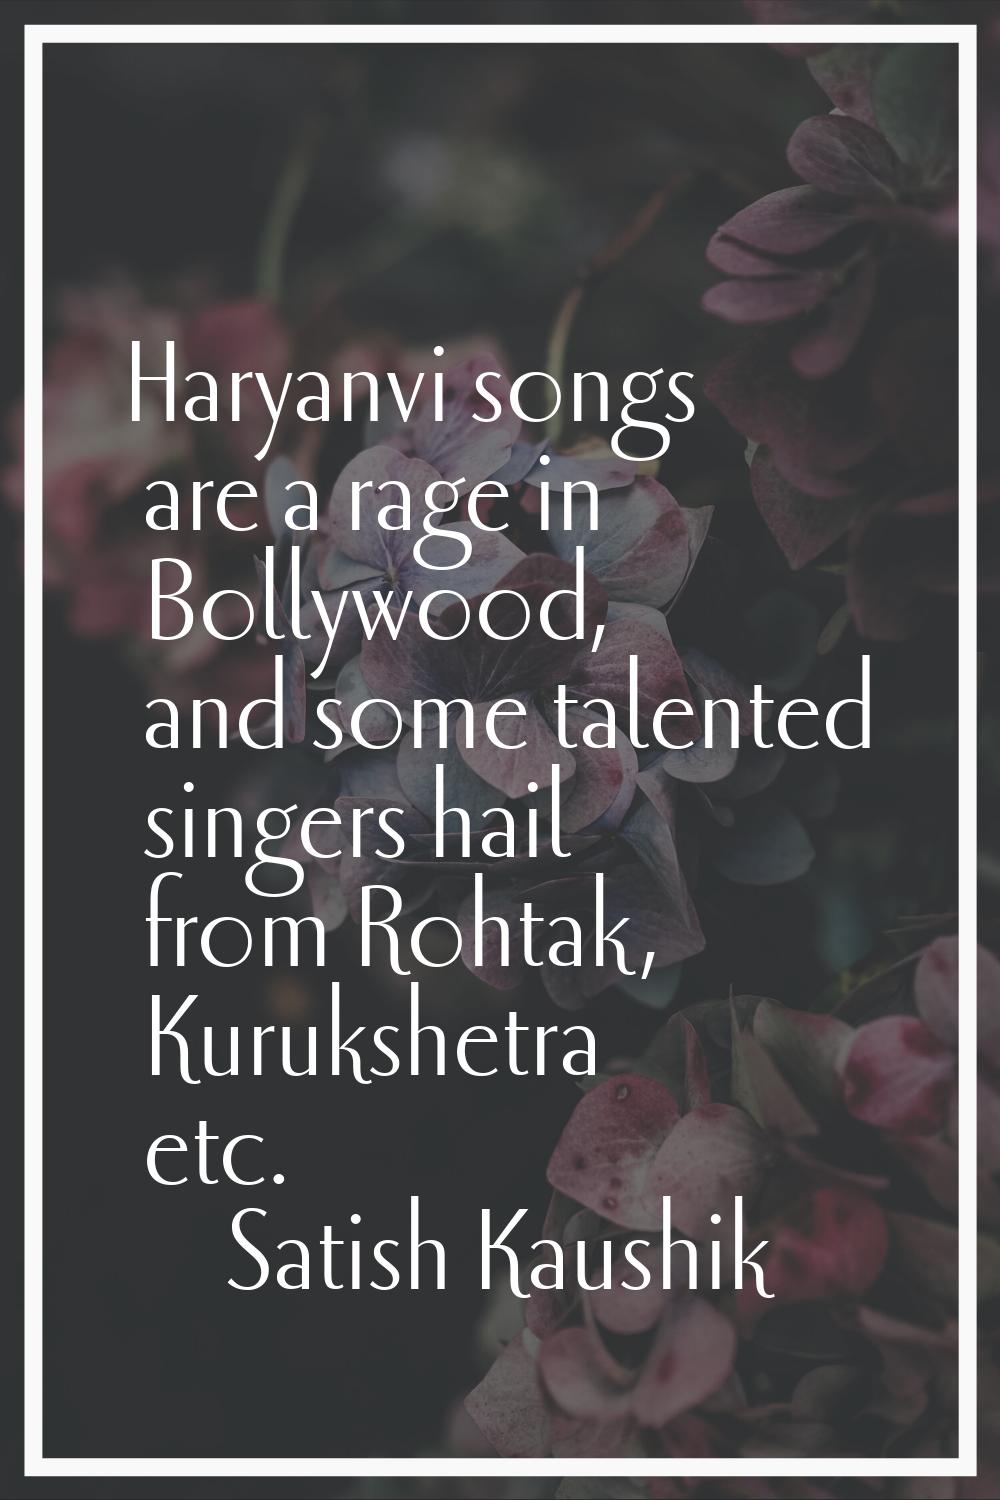 Haryanvi songs are a rage in Bollywood, and some talented singers hail from Rohtak, Kurukshetra etc